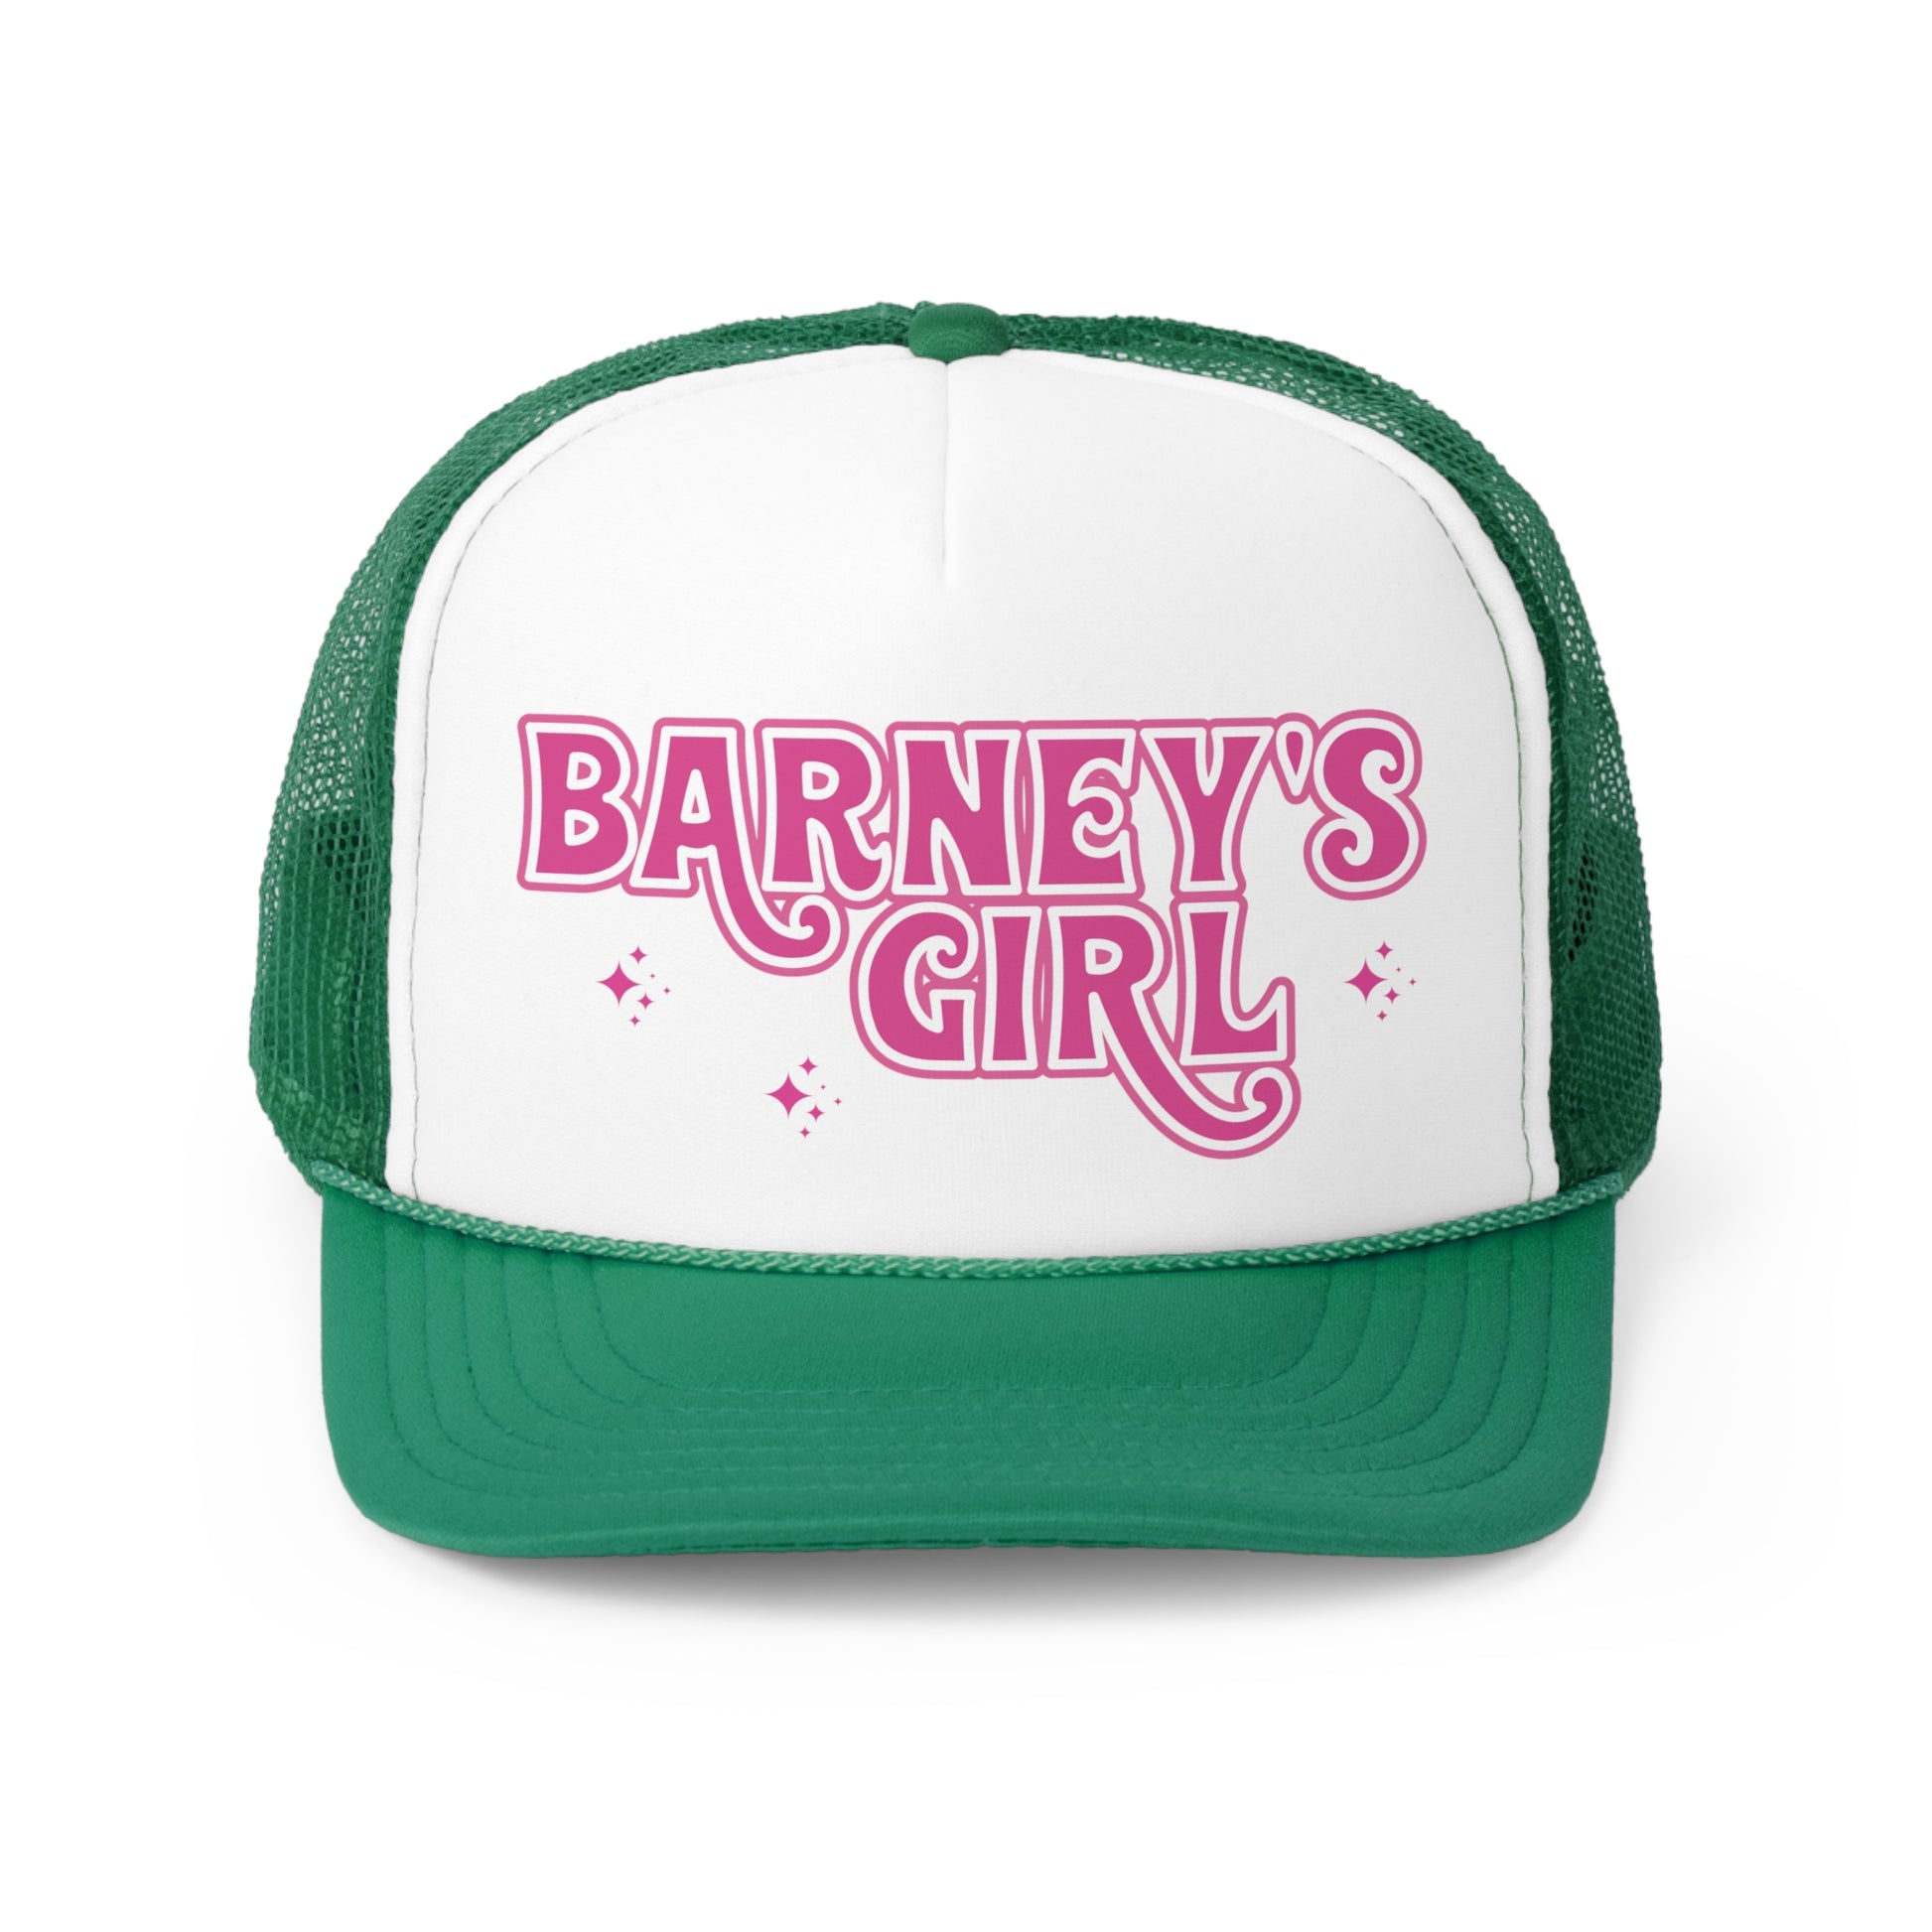 Barney's Girl | BARNEY'S BEANERY - Trucker Hat | Pink Graphic On Green And White Trucker Hat, Front View